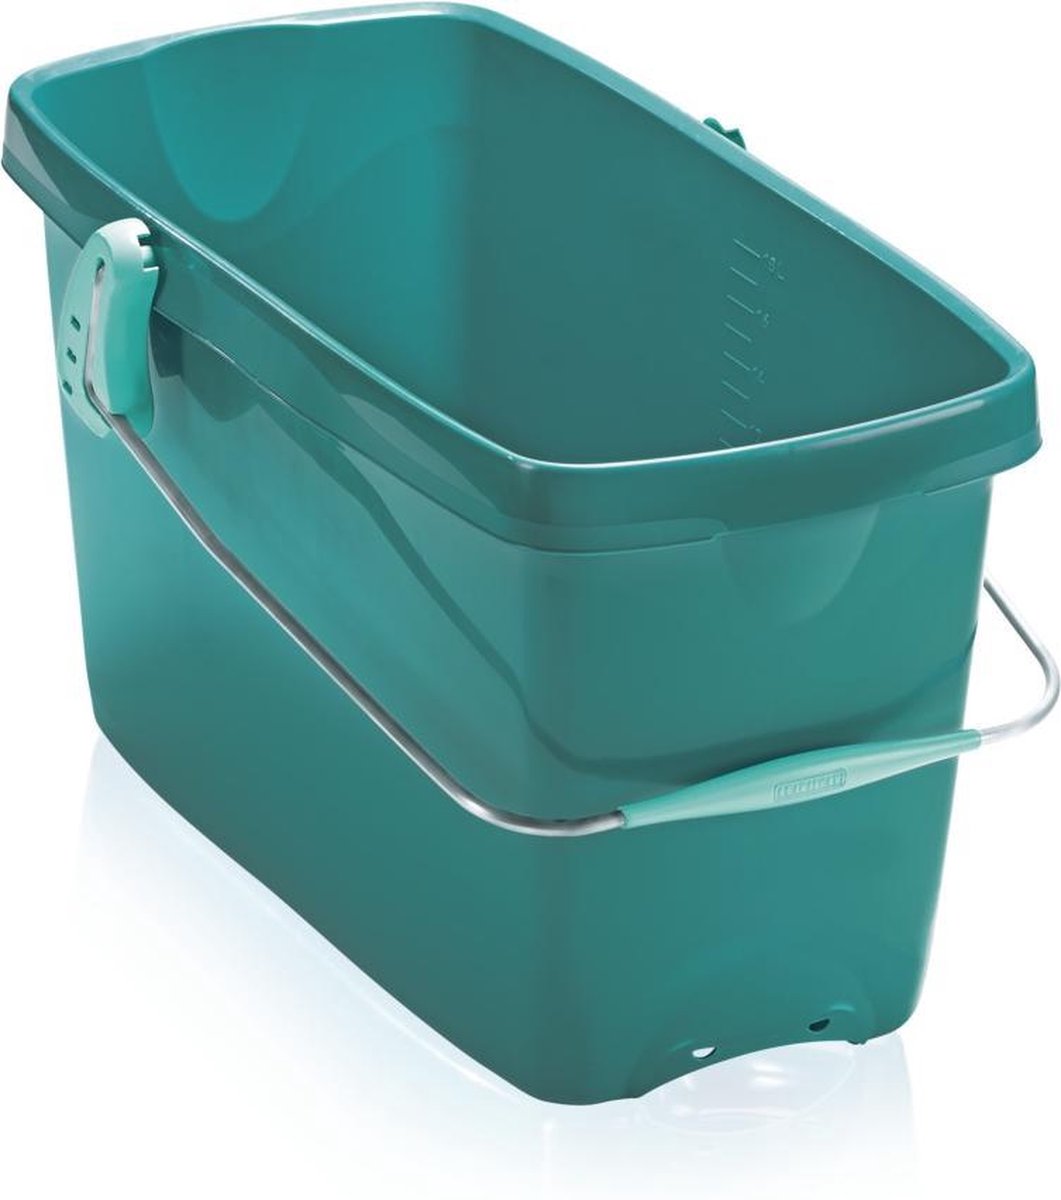 Leifheit Combi Xl Emmer - 20 Liter - Extra Breed - Turquoise